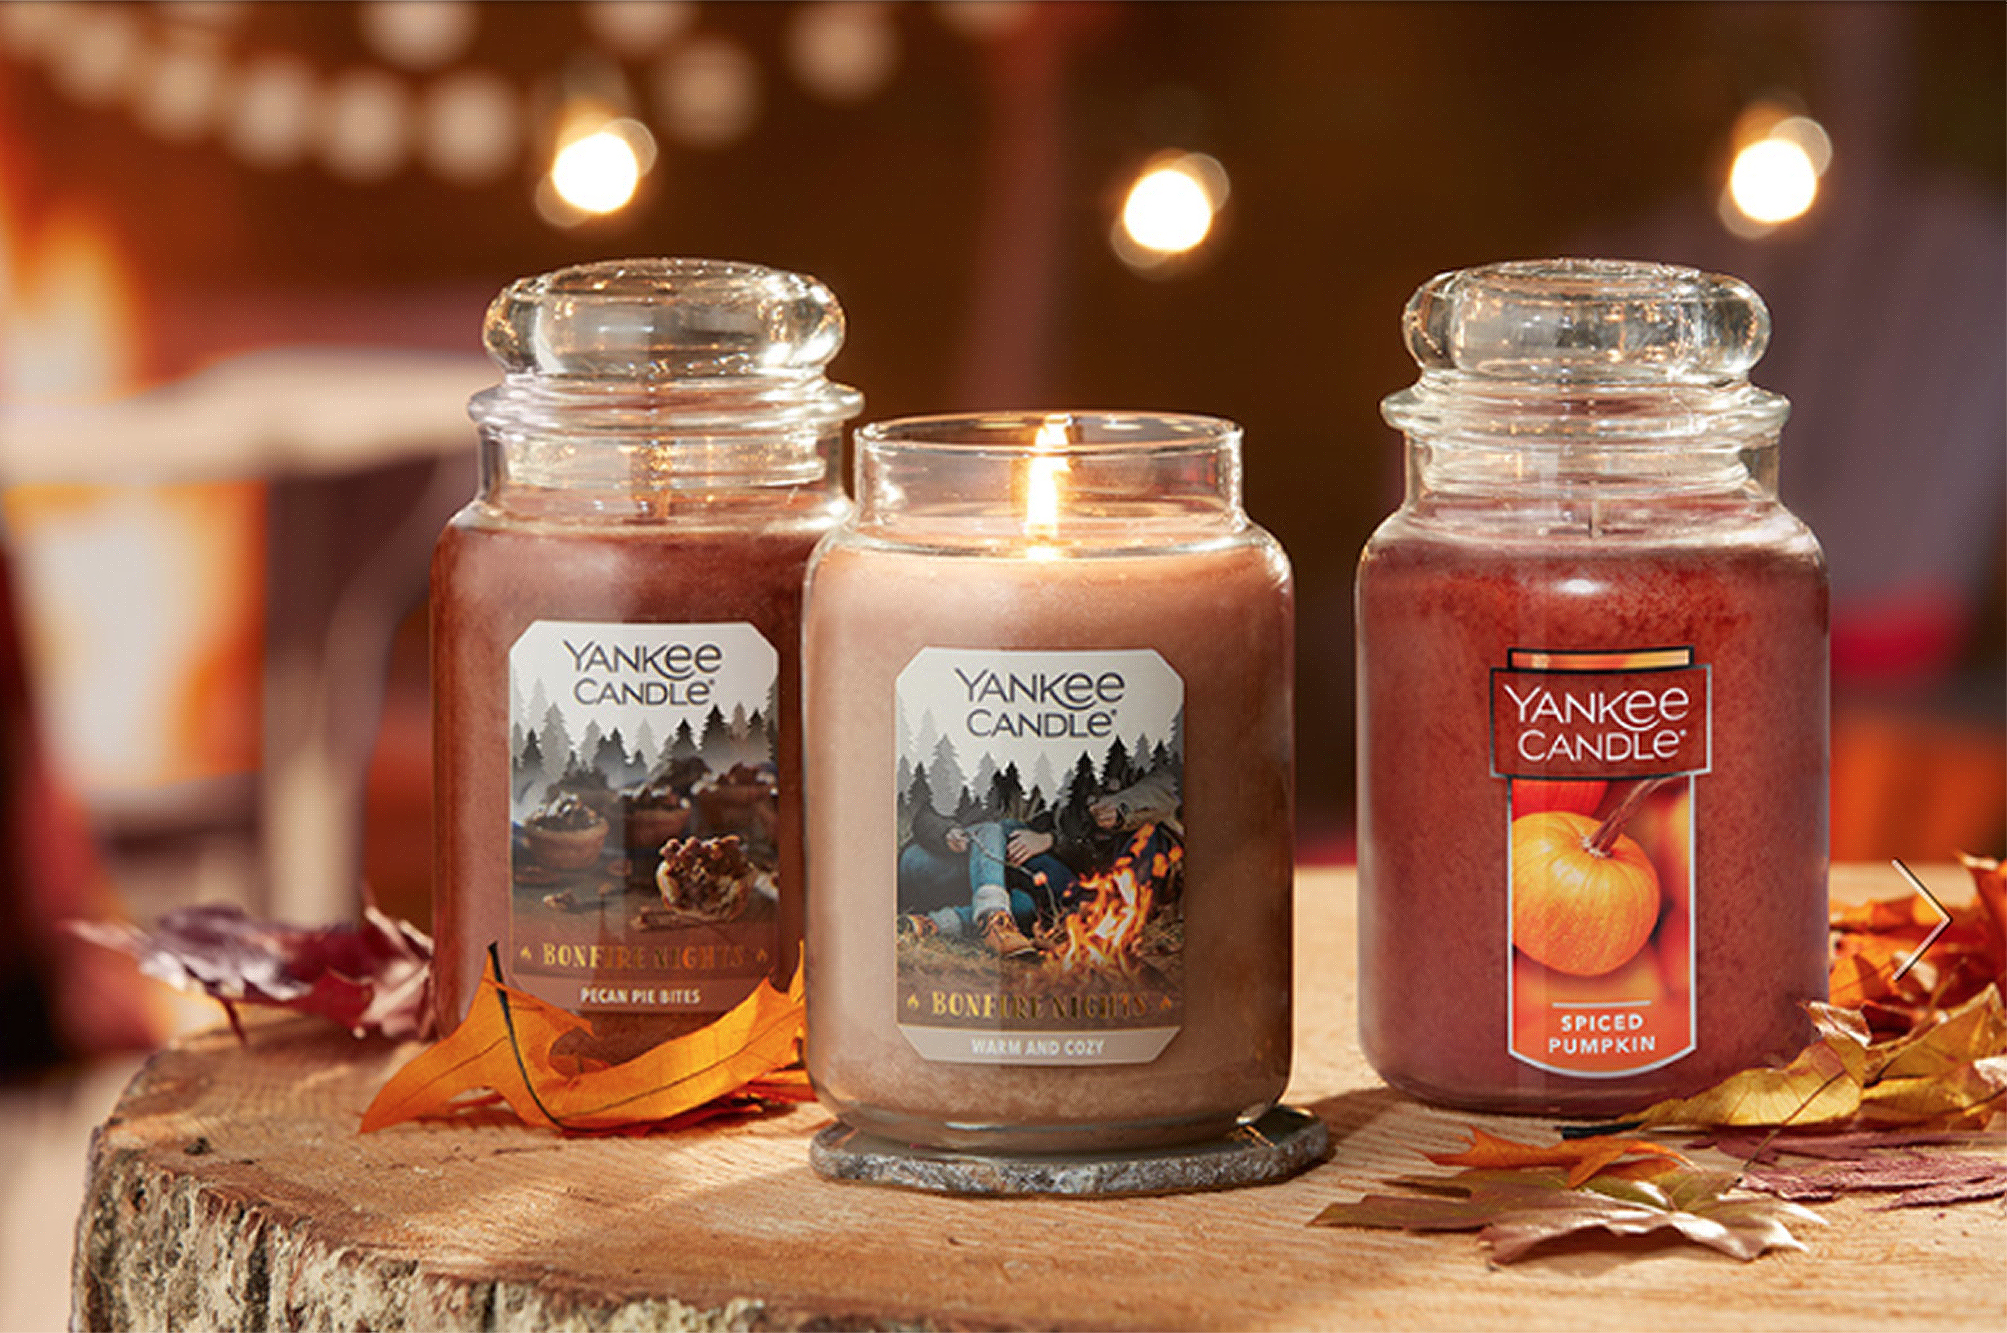 https://www.usmagazine.com/wp-content/uploads/2020/09/Yankee-Candle-Fall-September-Sale-2020.jpg?quality=78&strip=all